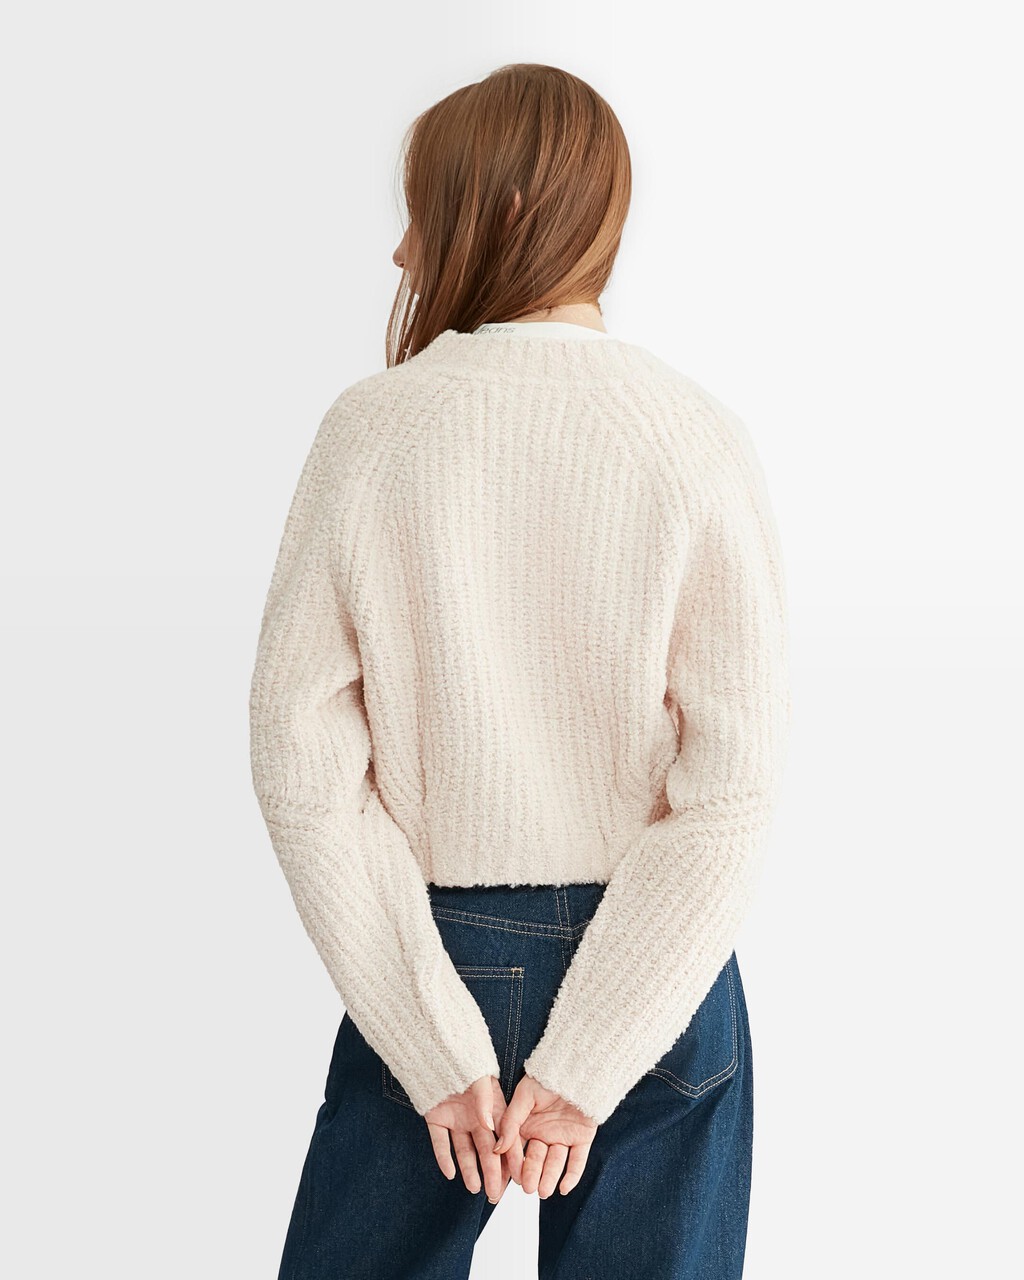 Cropped Cable Knit Cardigan, Putty Beige, hi-res